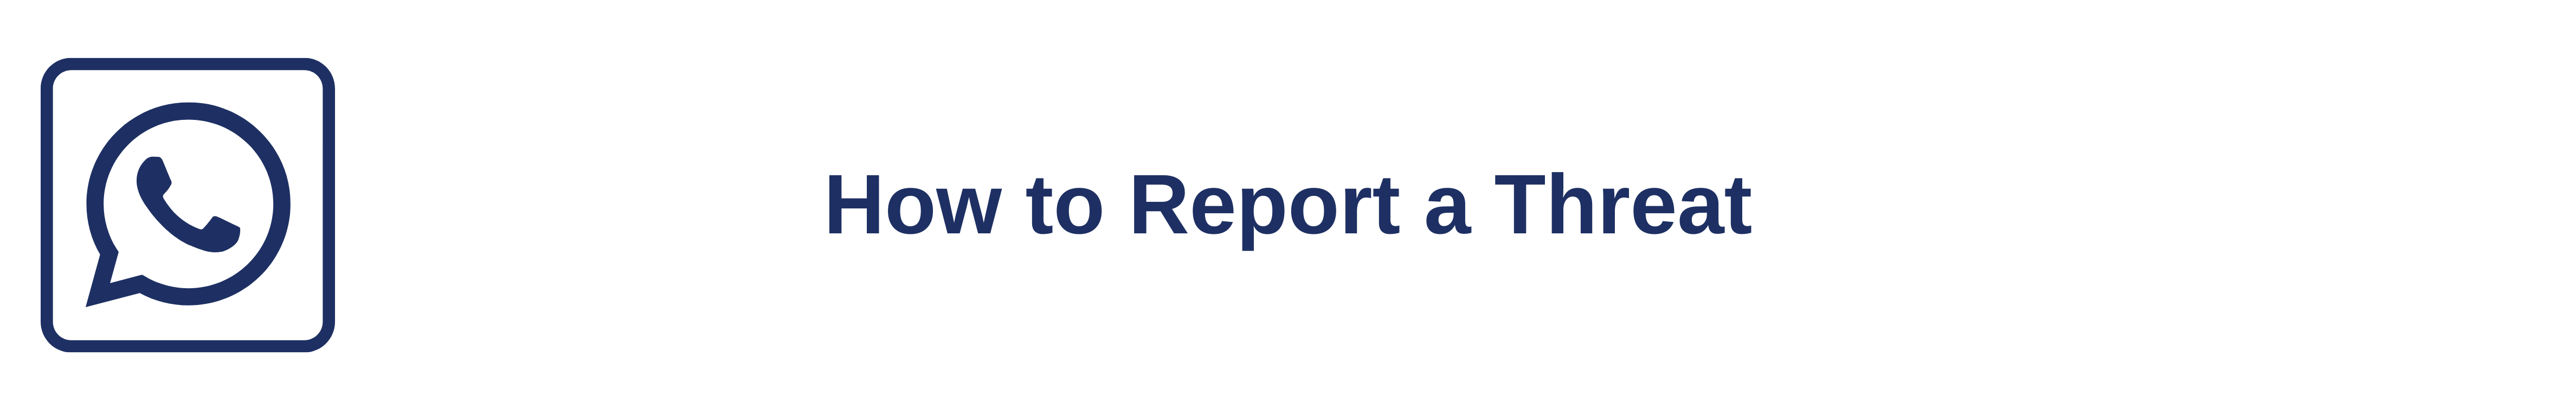 How to Report a Threat